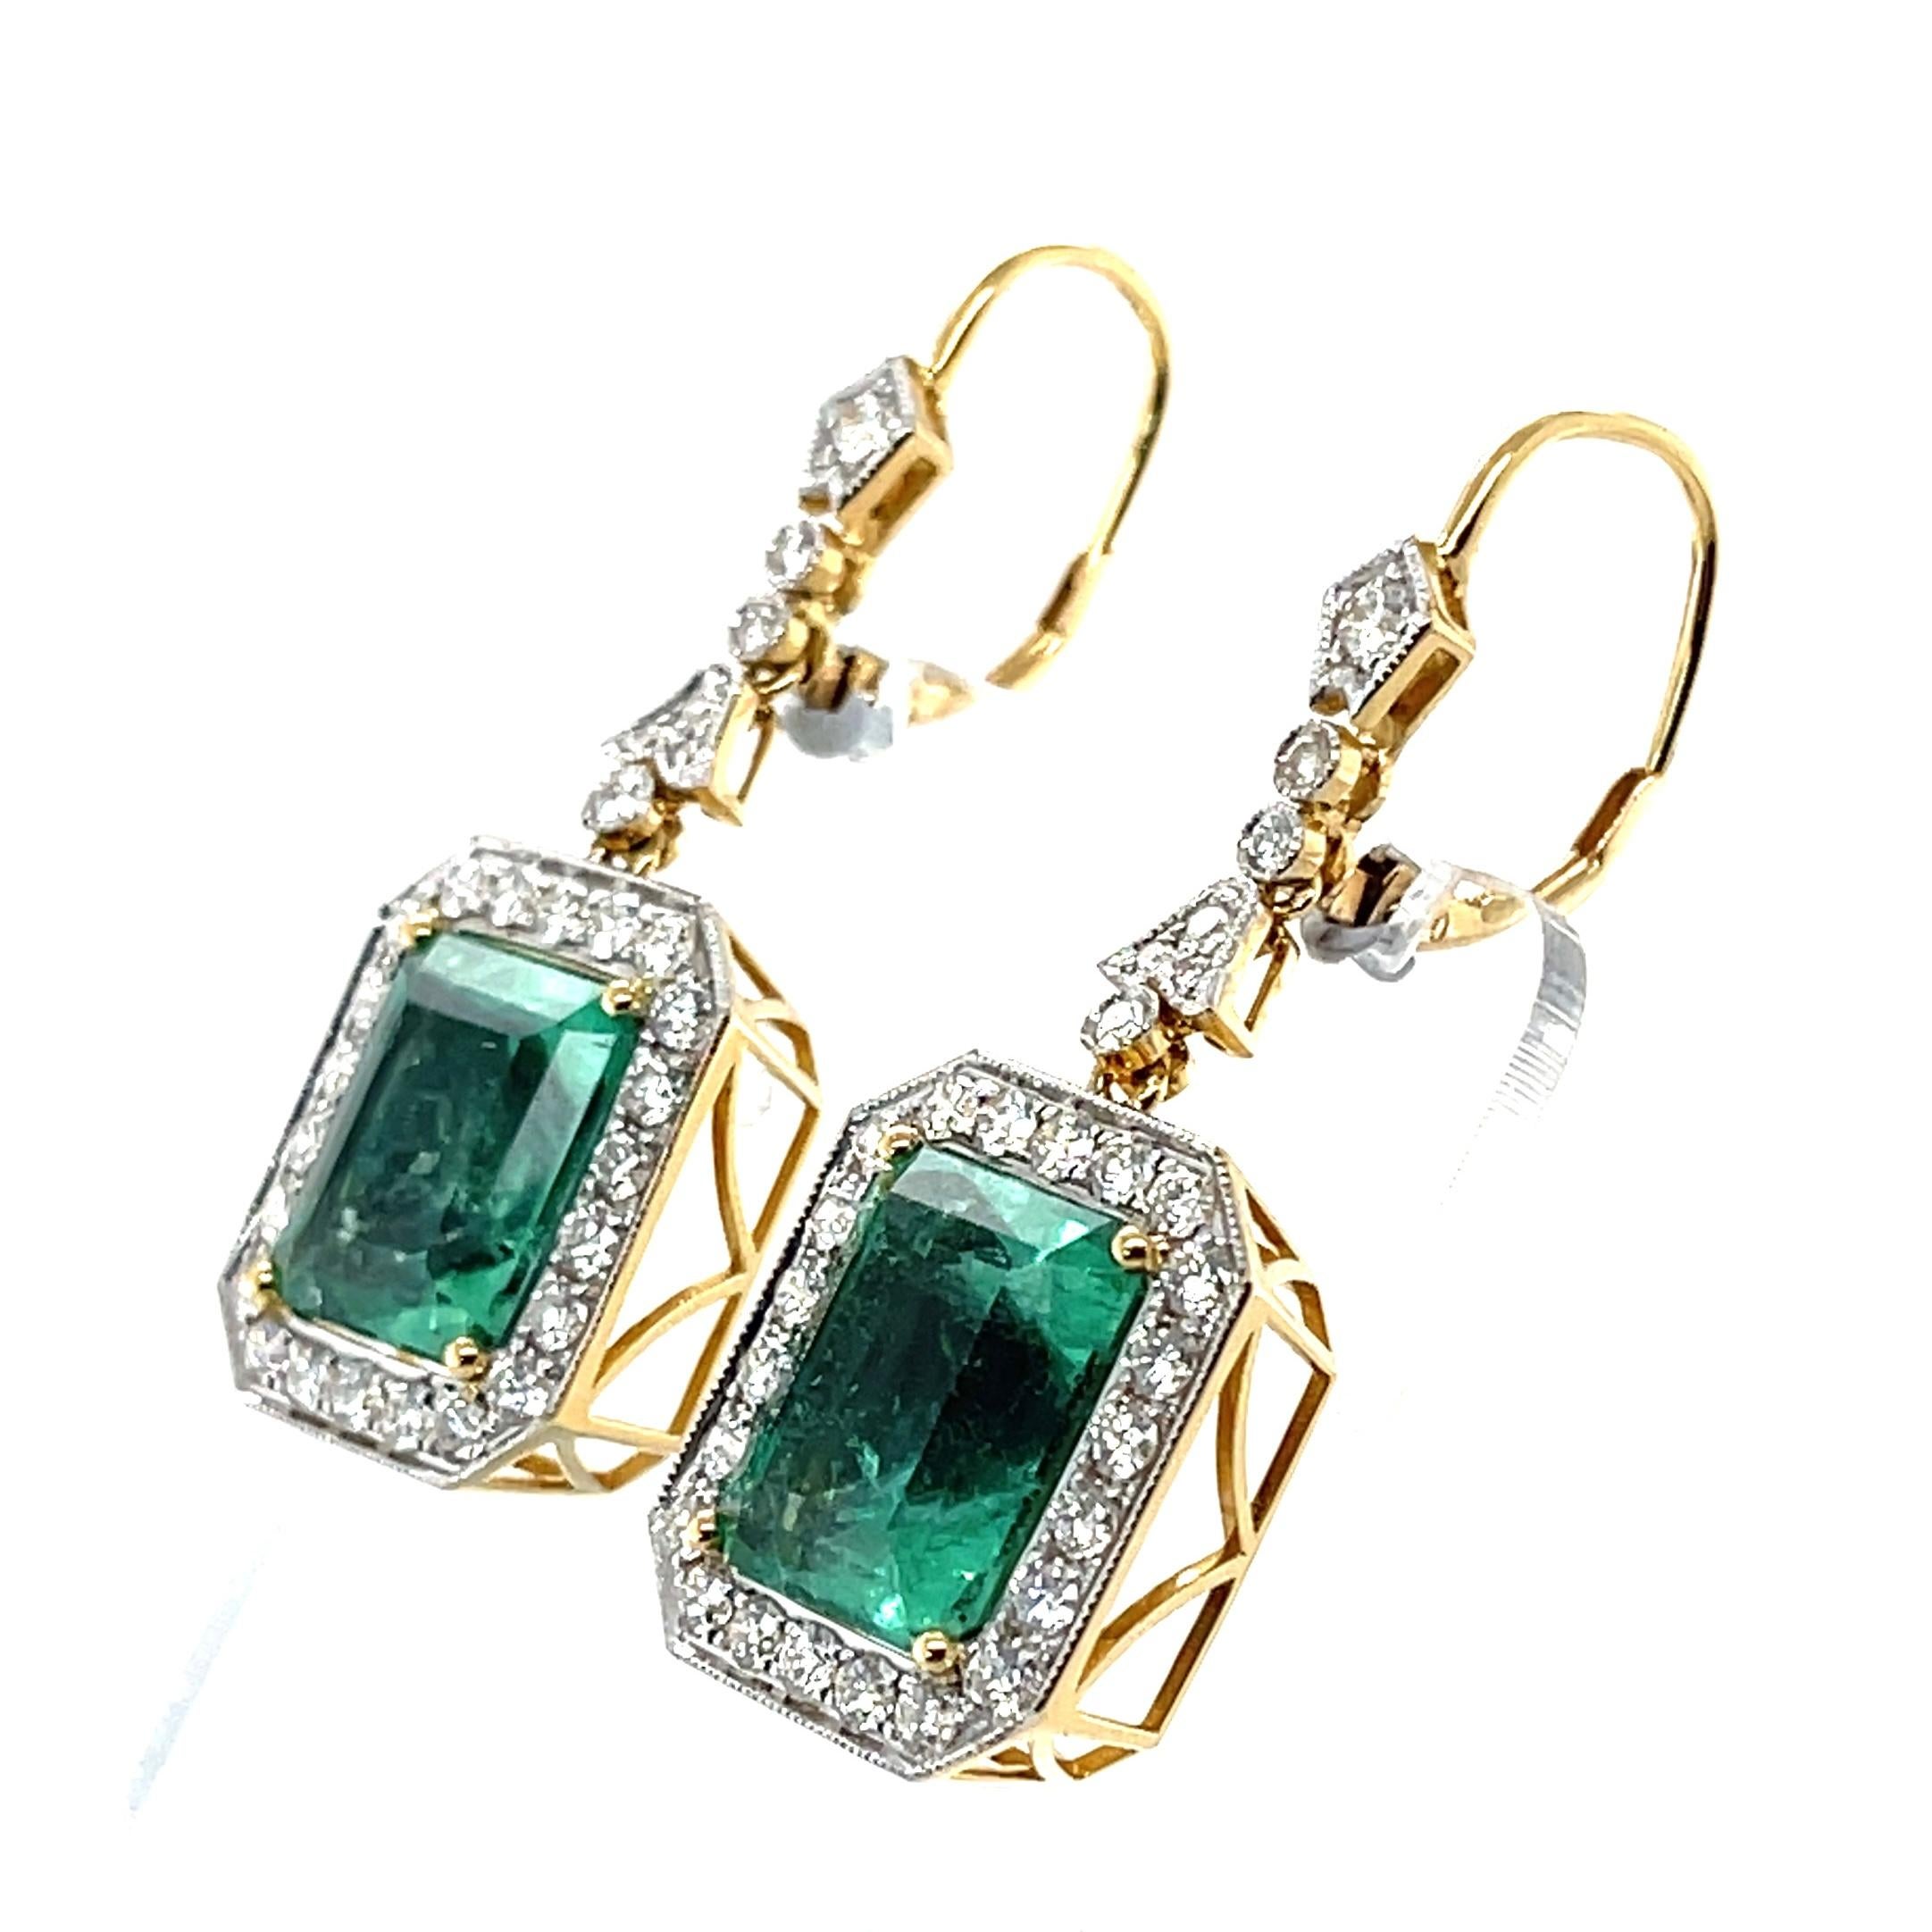 Pair of emerald cut Colombian (based on my opinion) emeralds, crafted in eighteen karat yellow gold, featuring a stunning collection of fifty-eight claw and rub over set round brilliant cut diamonds. complimented with a polished finish